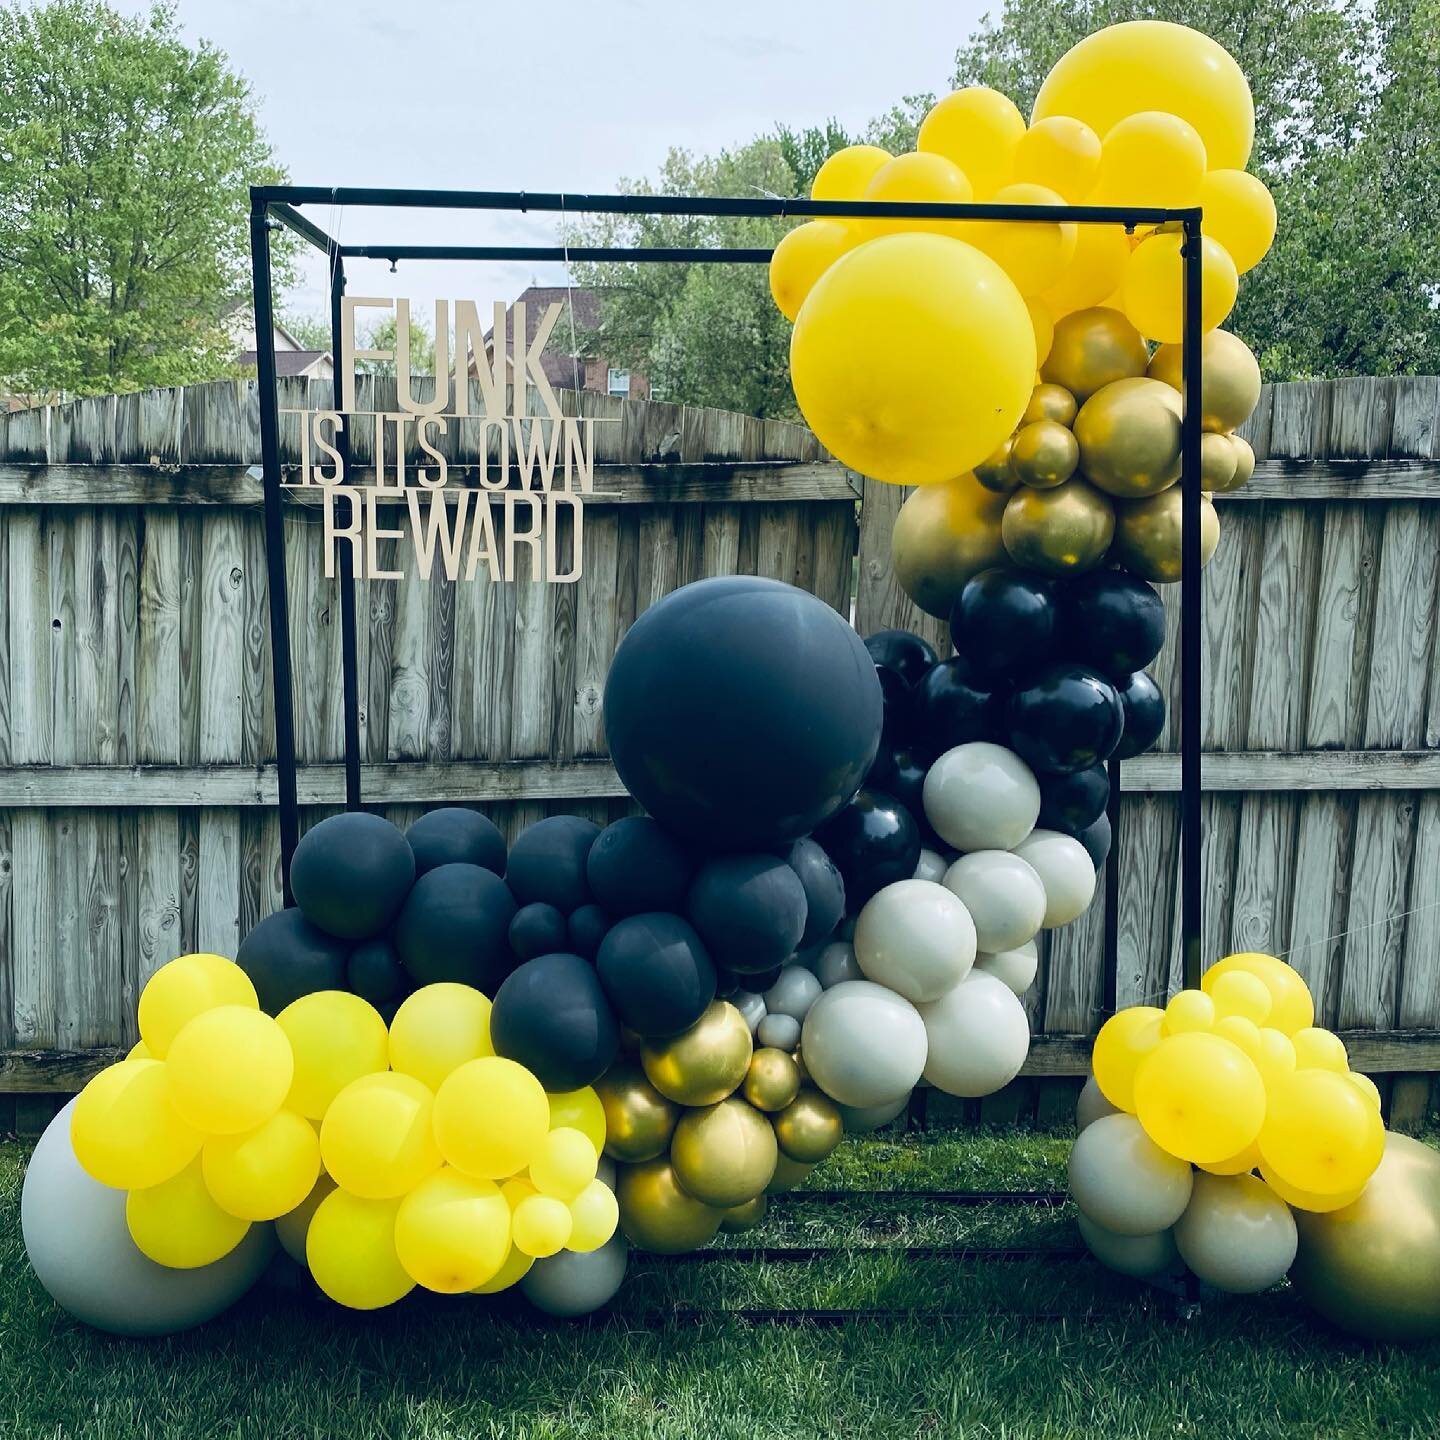 🎵Ain&rsquo;t no party like a pfunk party🎶

#goingawayparty #parlimentfunkadelics #pfunkparty #cookoutdecor #backyardpartyideas #funkadelic #maggotbrain #70smusic #eventdesign #eventinspo #balloongarland